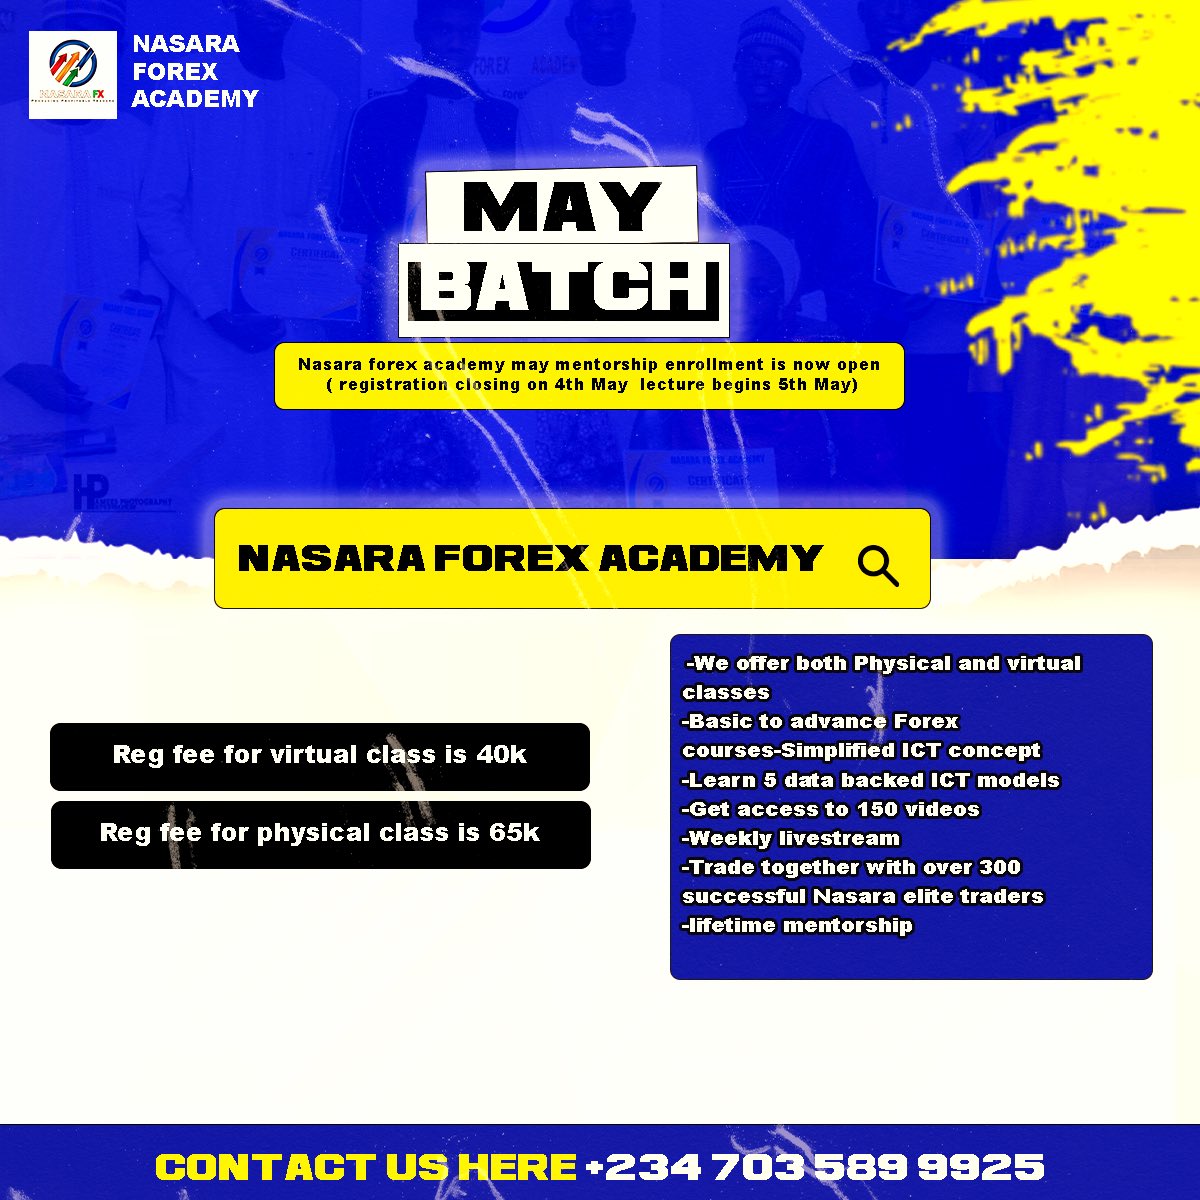 Flash News: Nasara Forex Academy May Batch Registration is Now Open Kindly Check Flyer for More Details #nasaracapital #NasaraElite